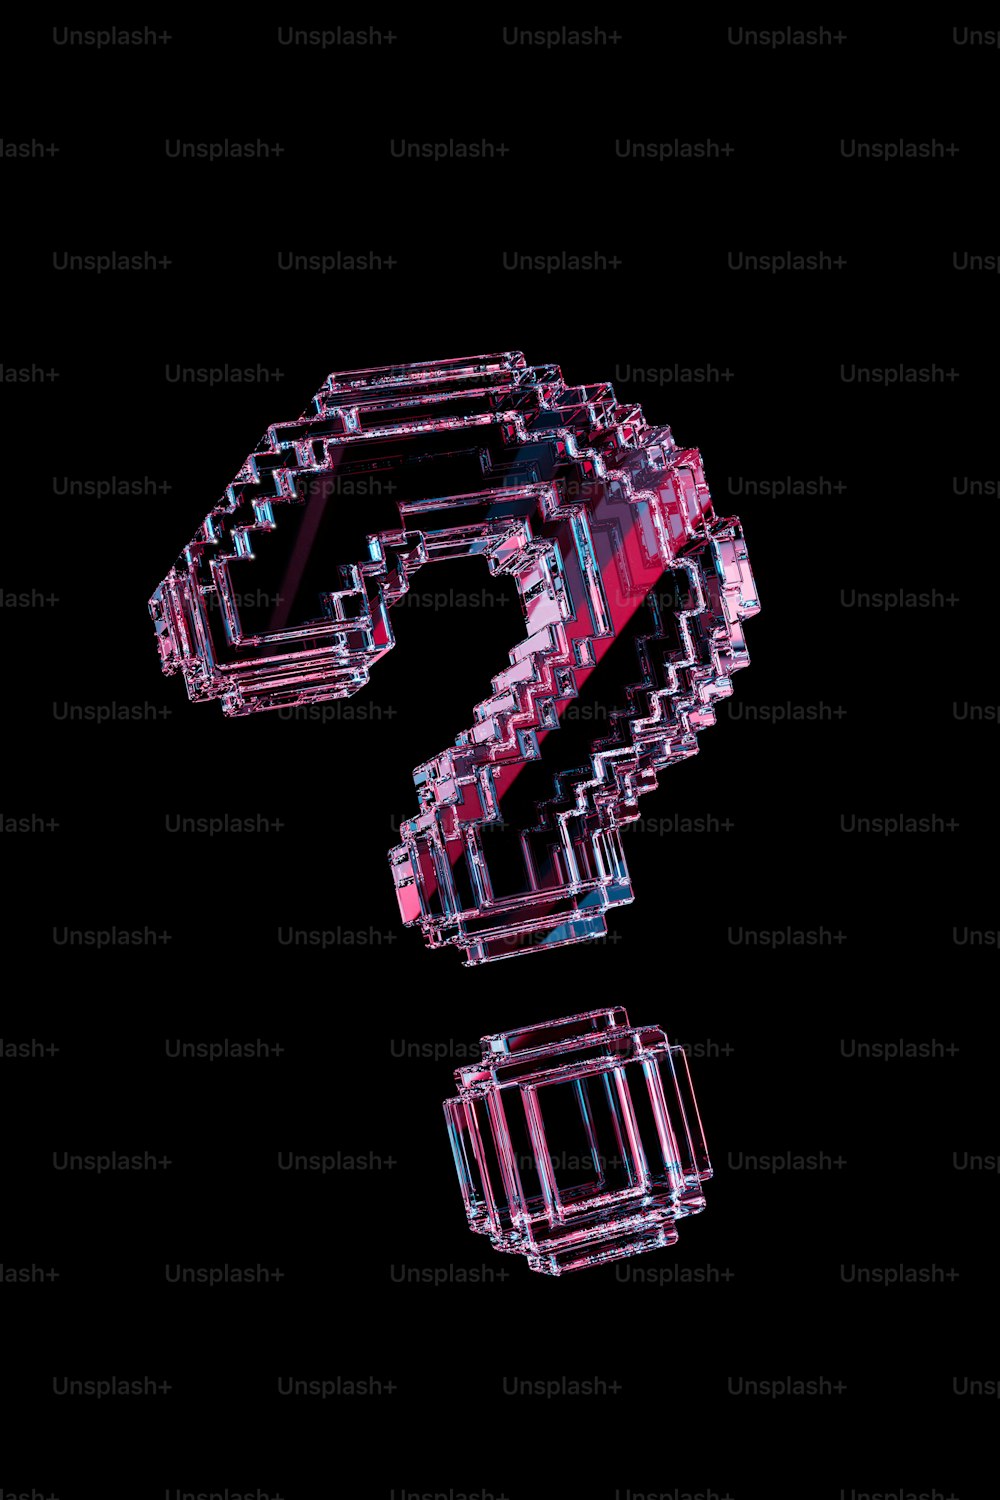 a 3d image of a question mark on a black background